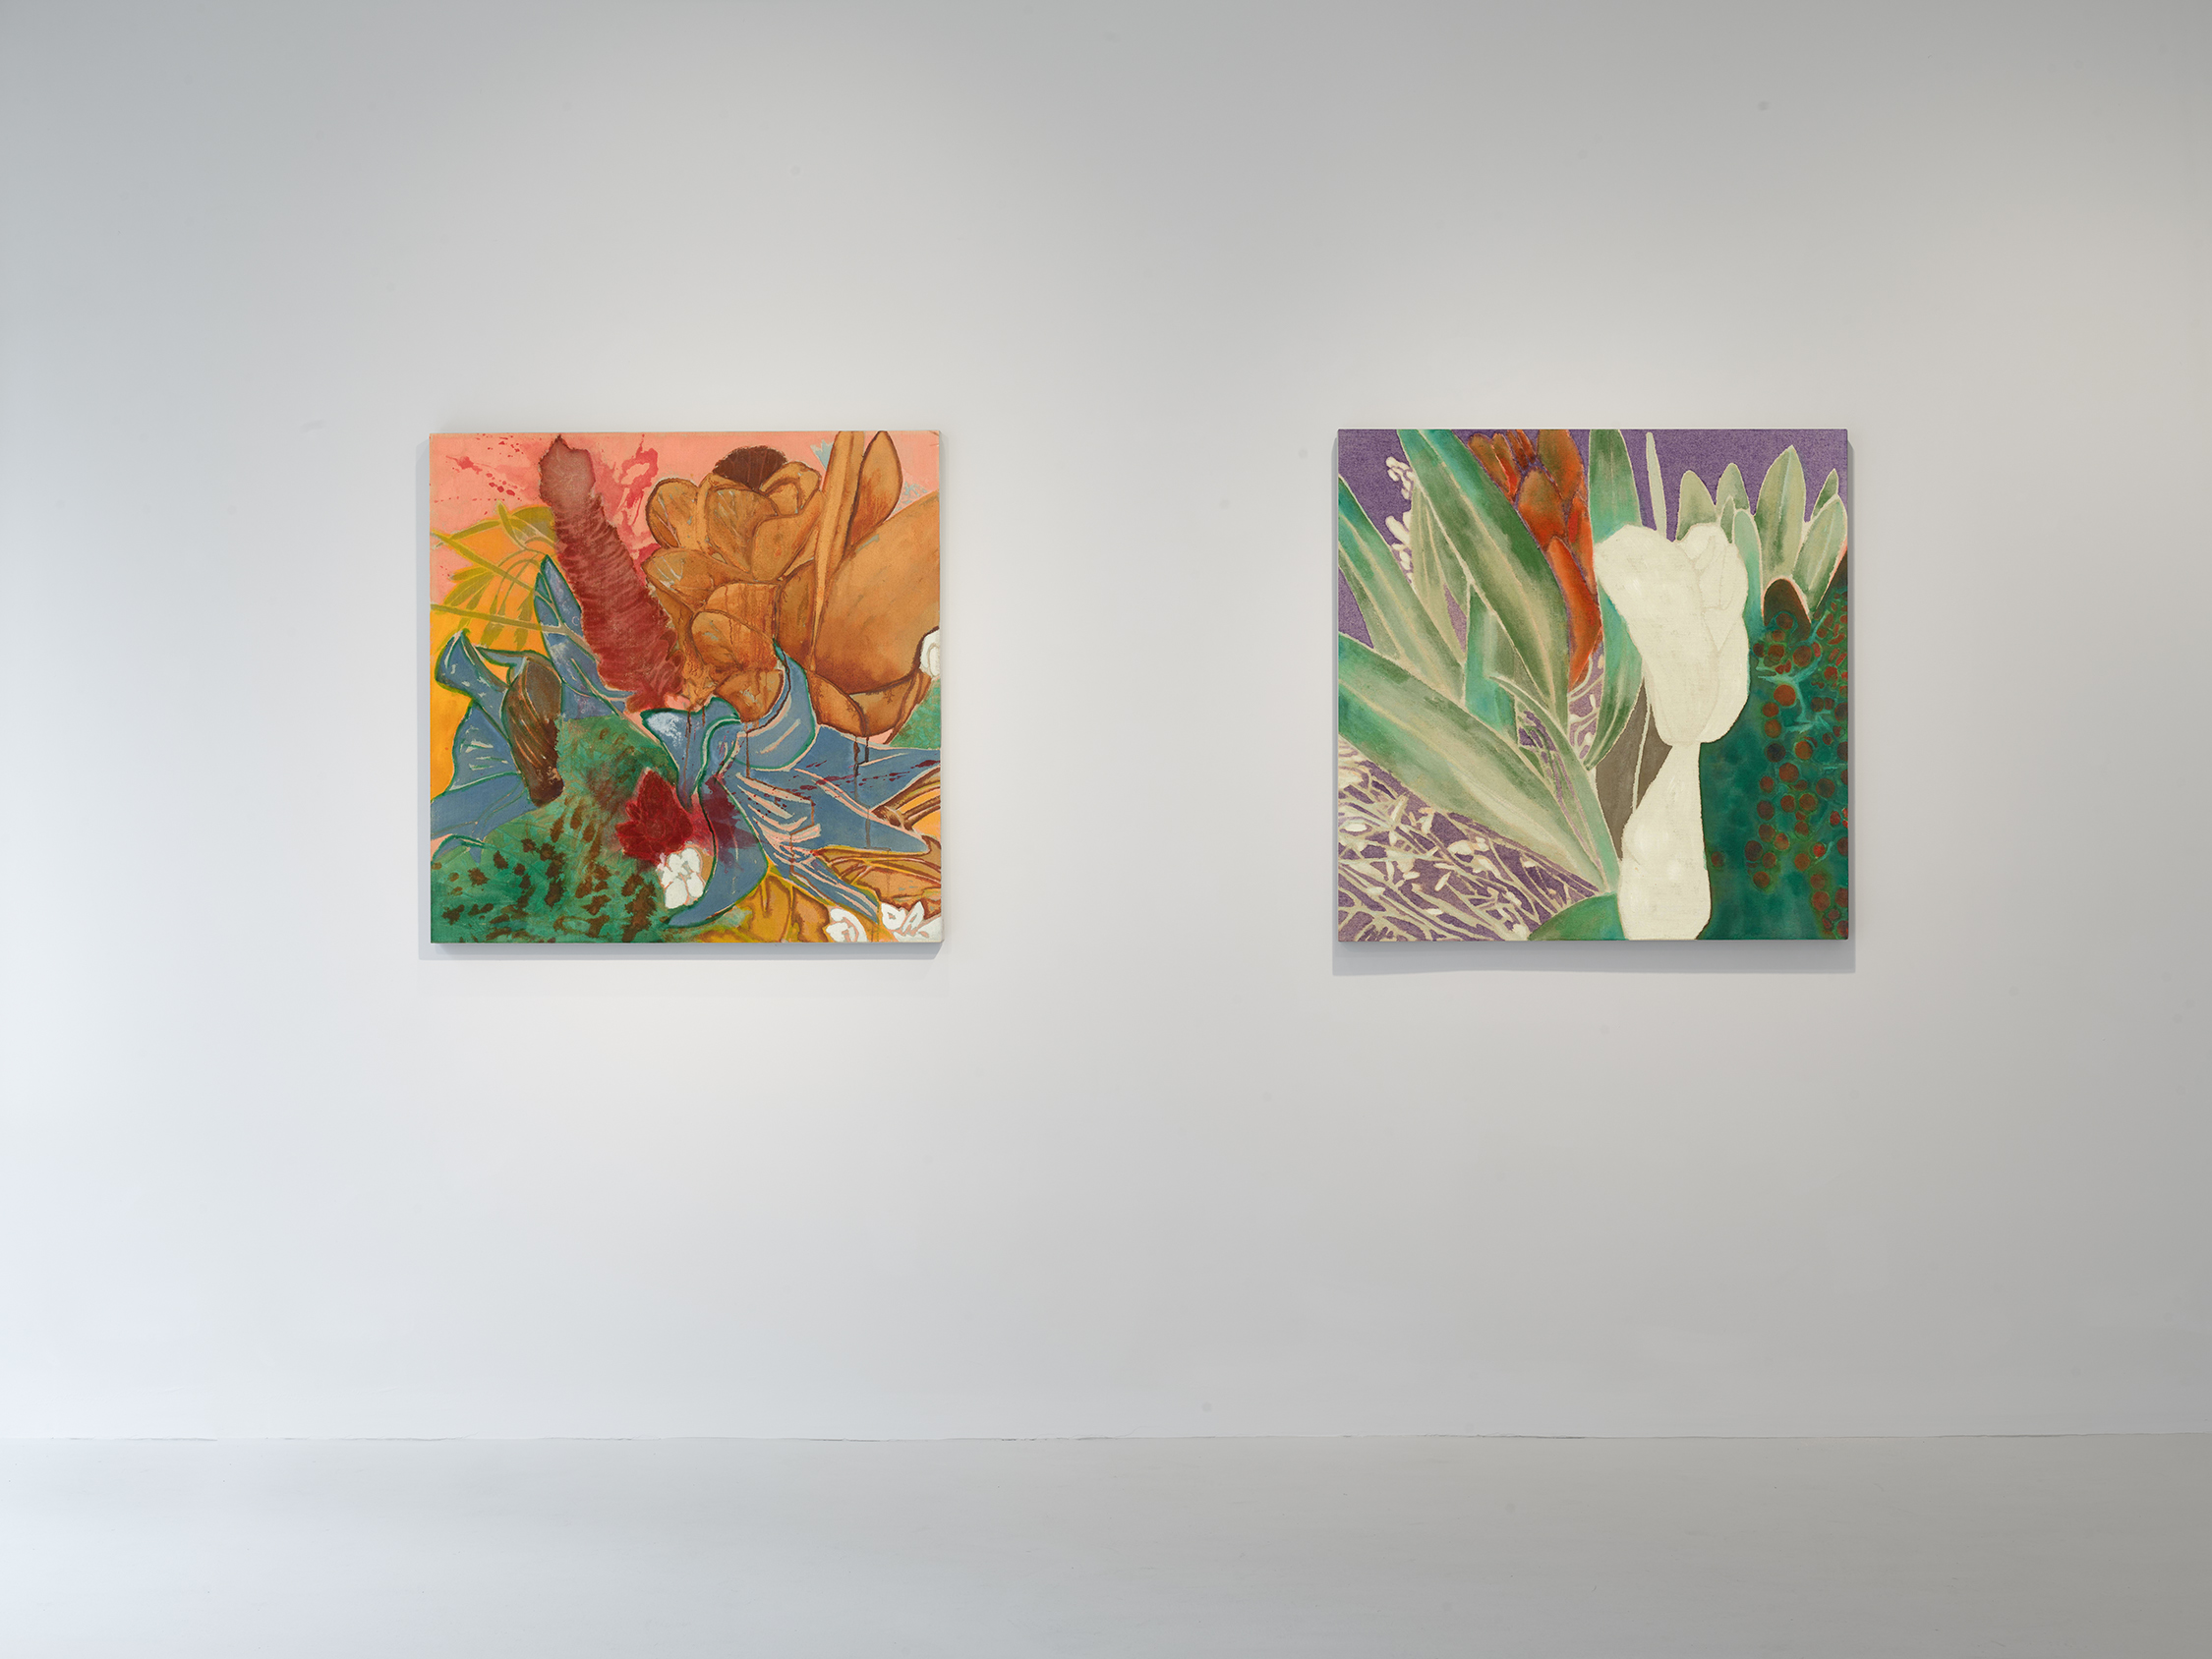 Installation view of Francesco Clemente: Winter Flowers at 40 Albemarle Street